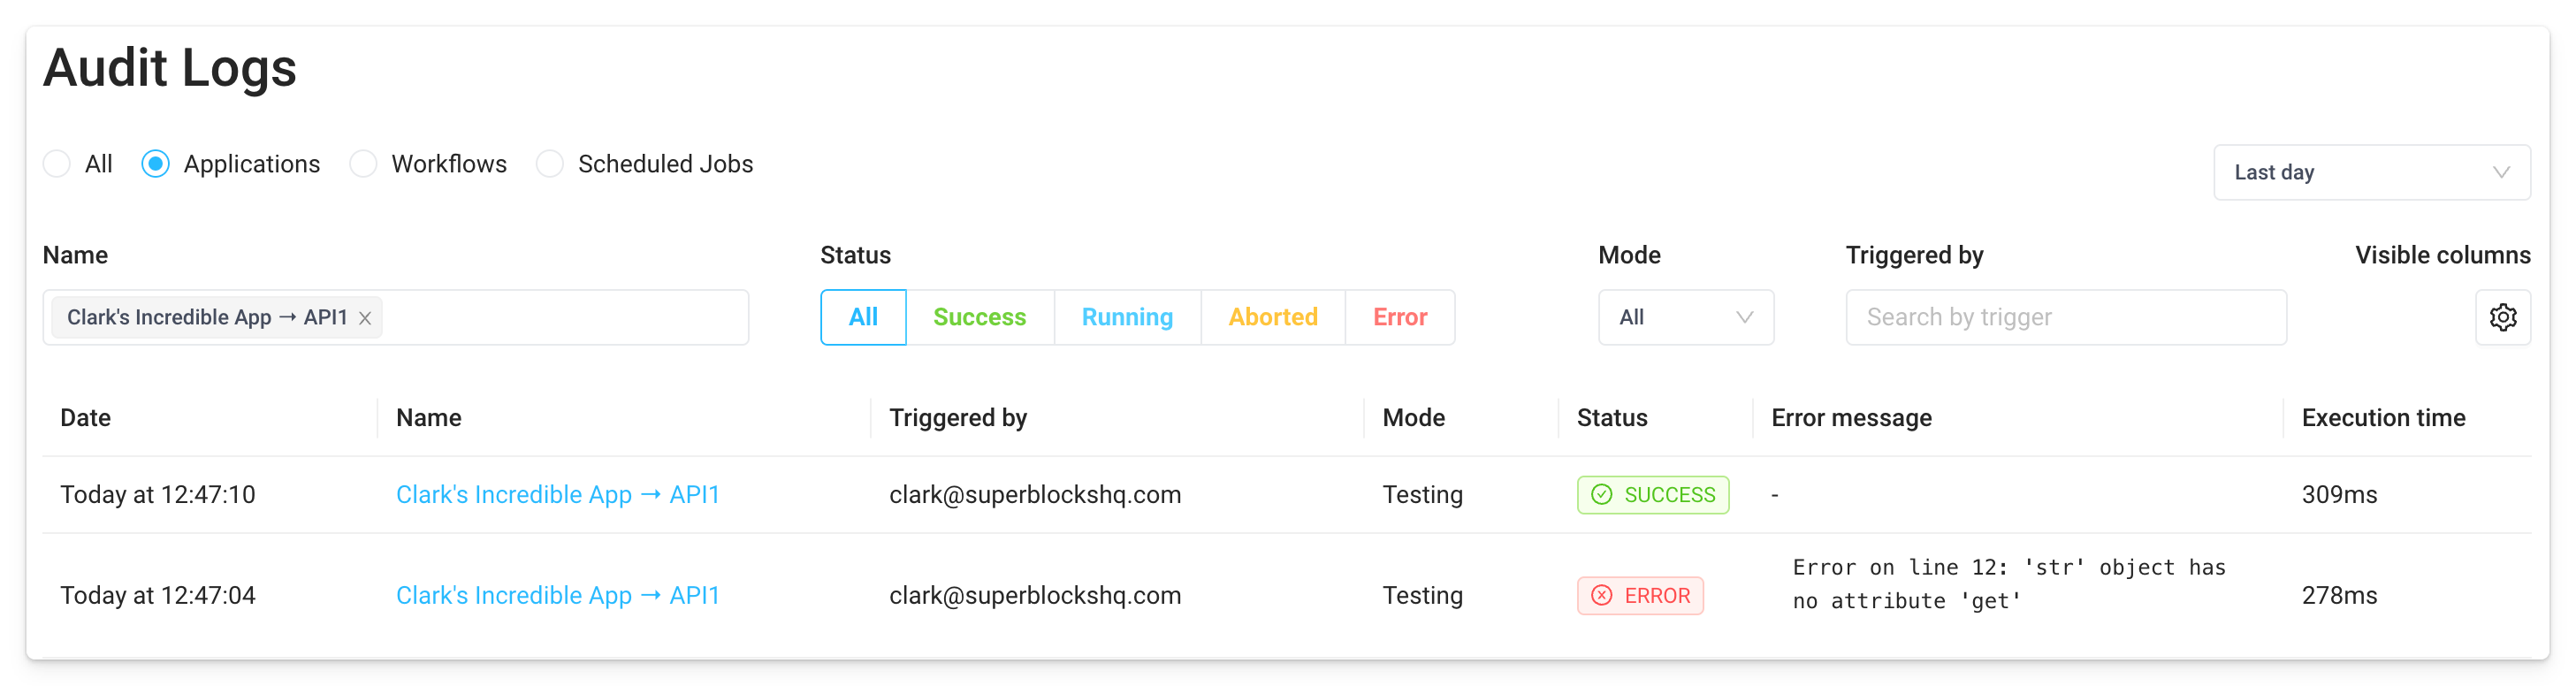 example logs from a superblocks application